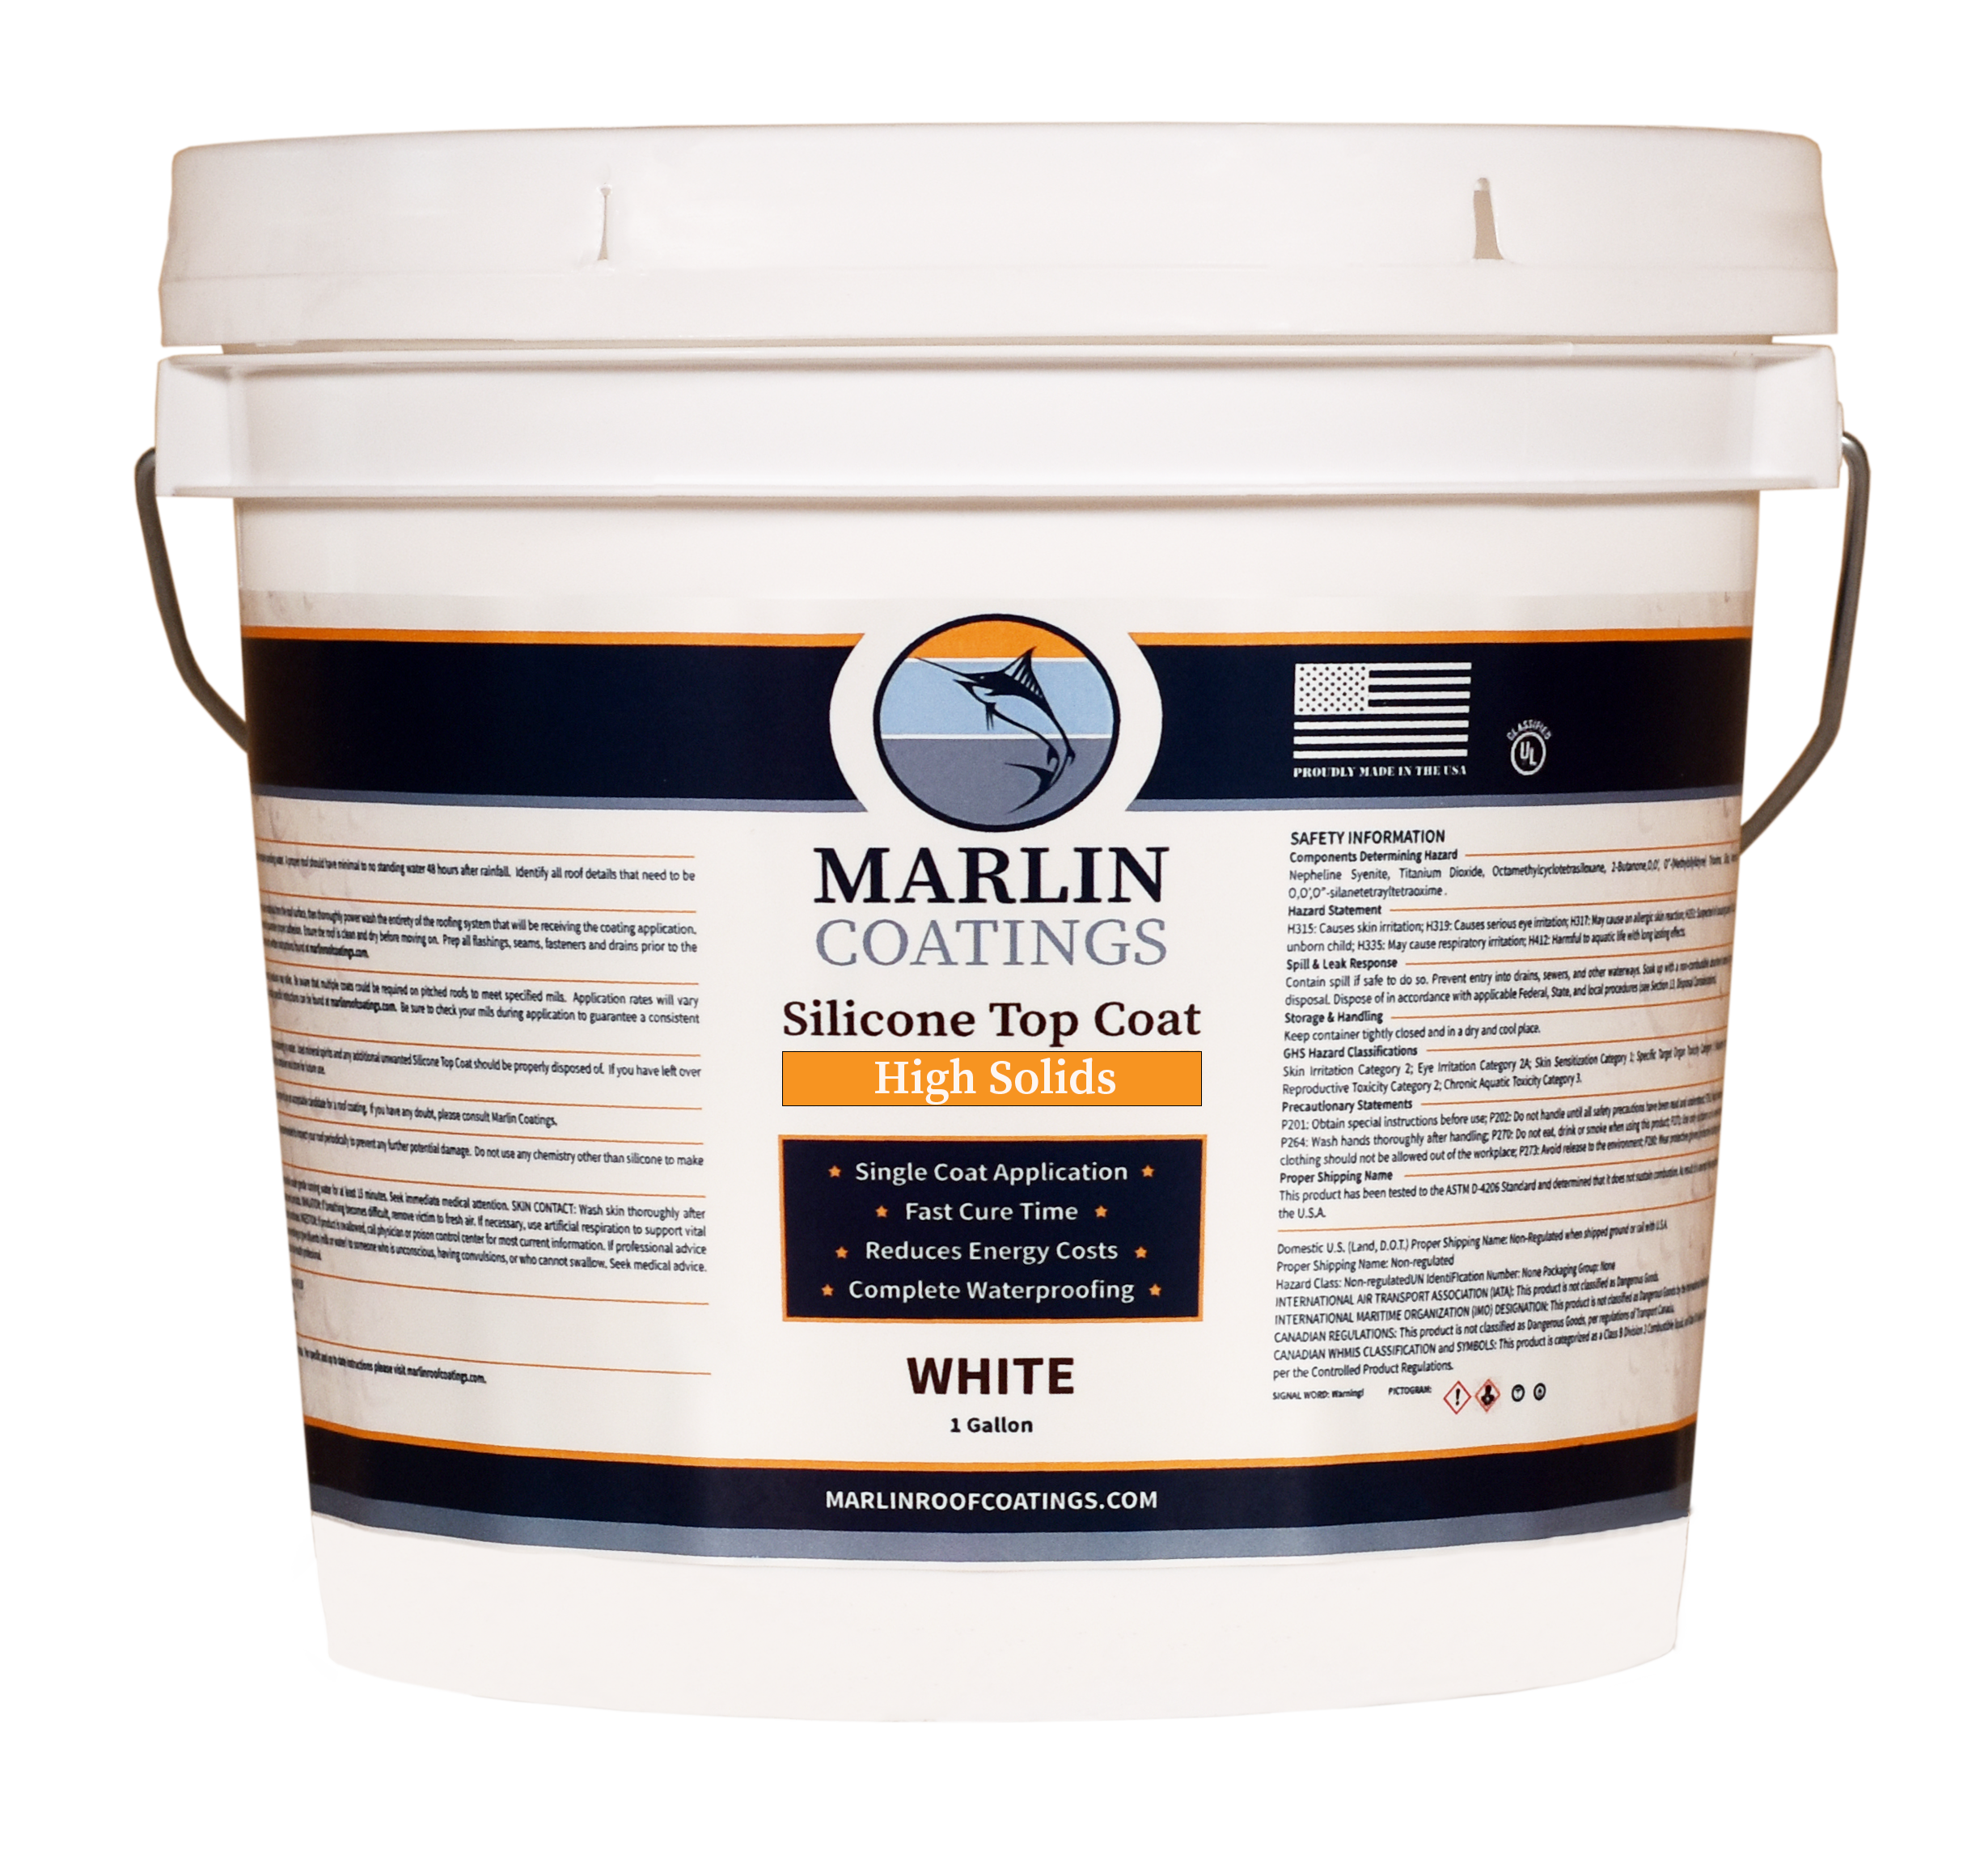 White RV Roof Coating - 1 Gal. can - 1 can / case-FREE DELIVERY